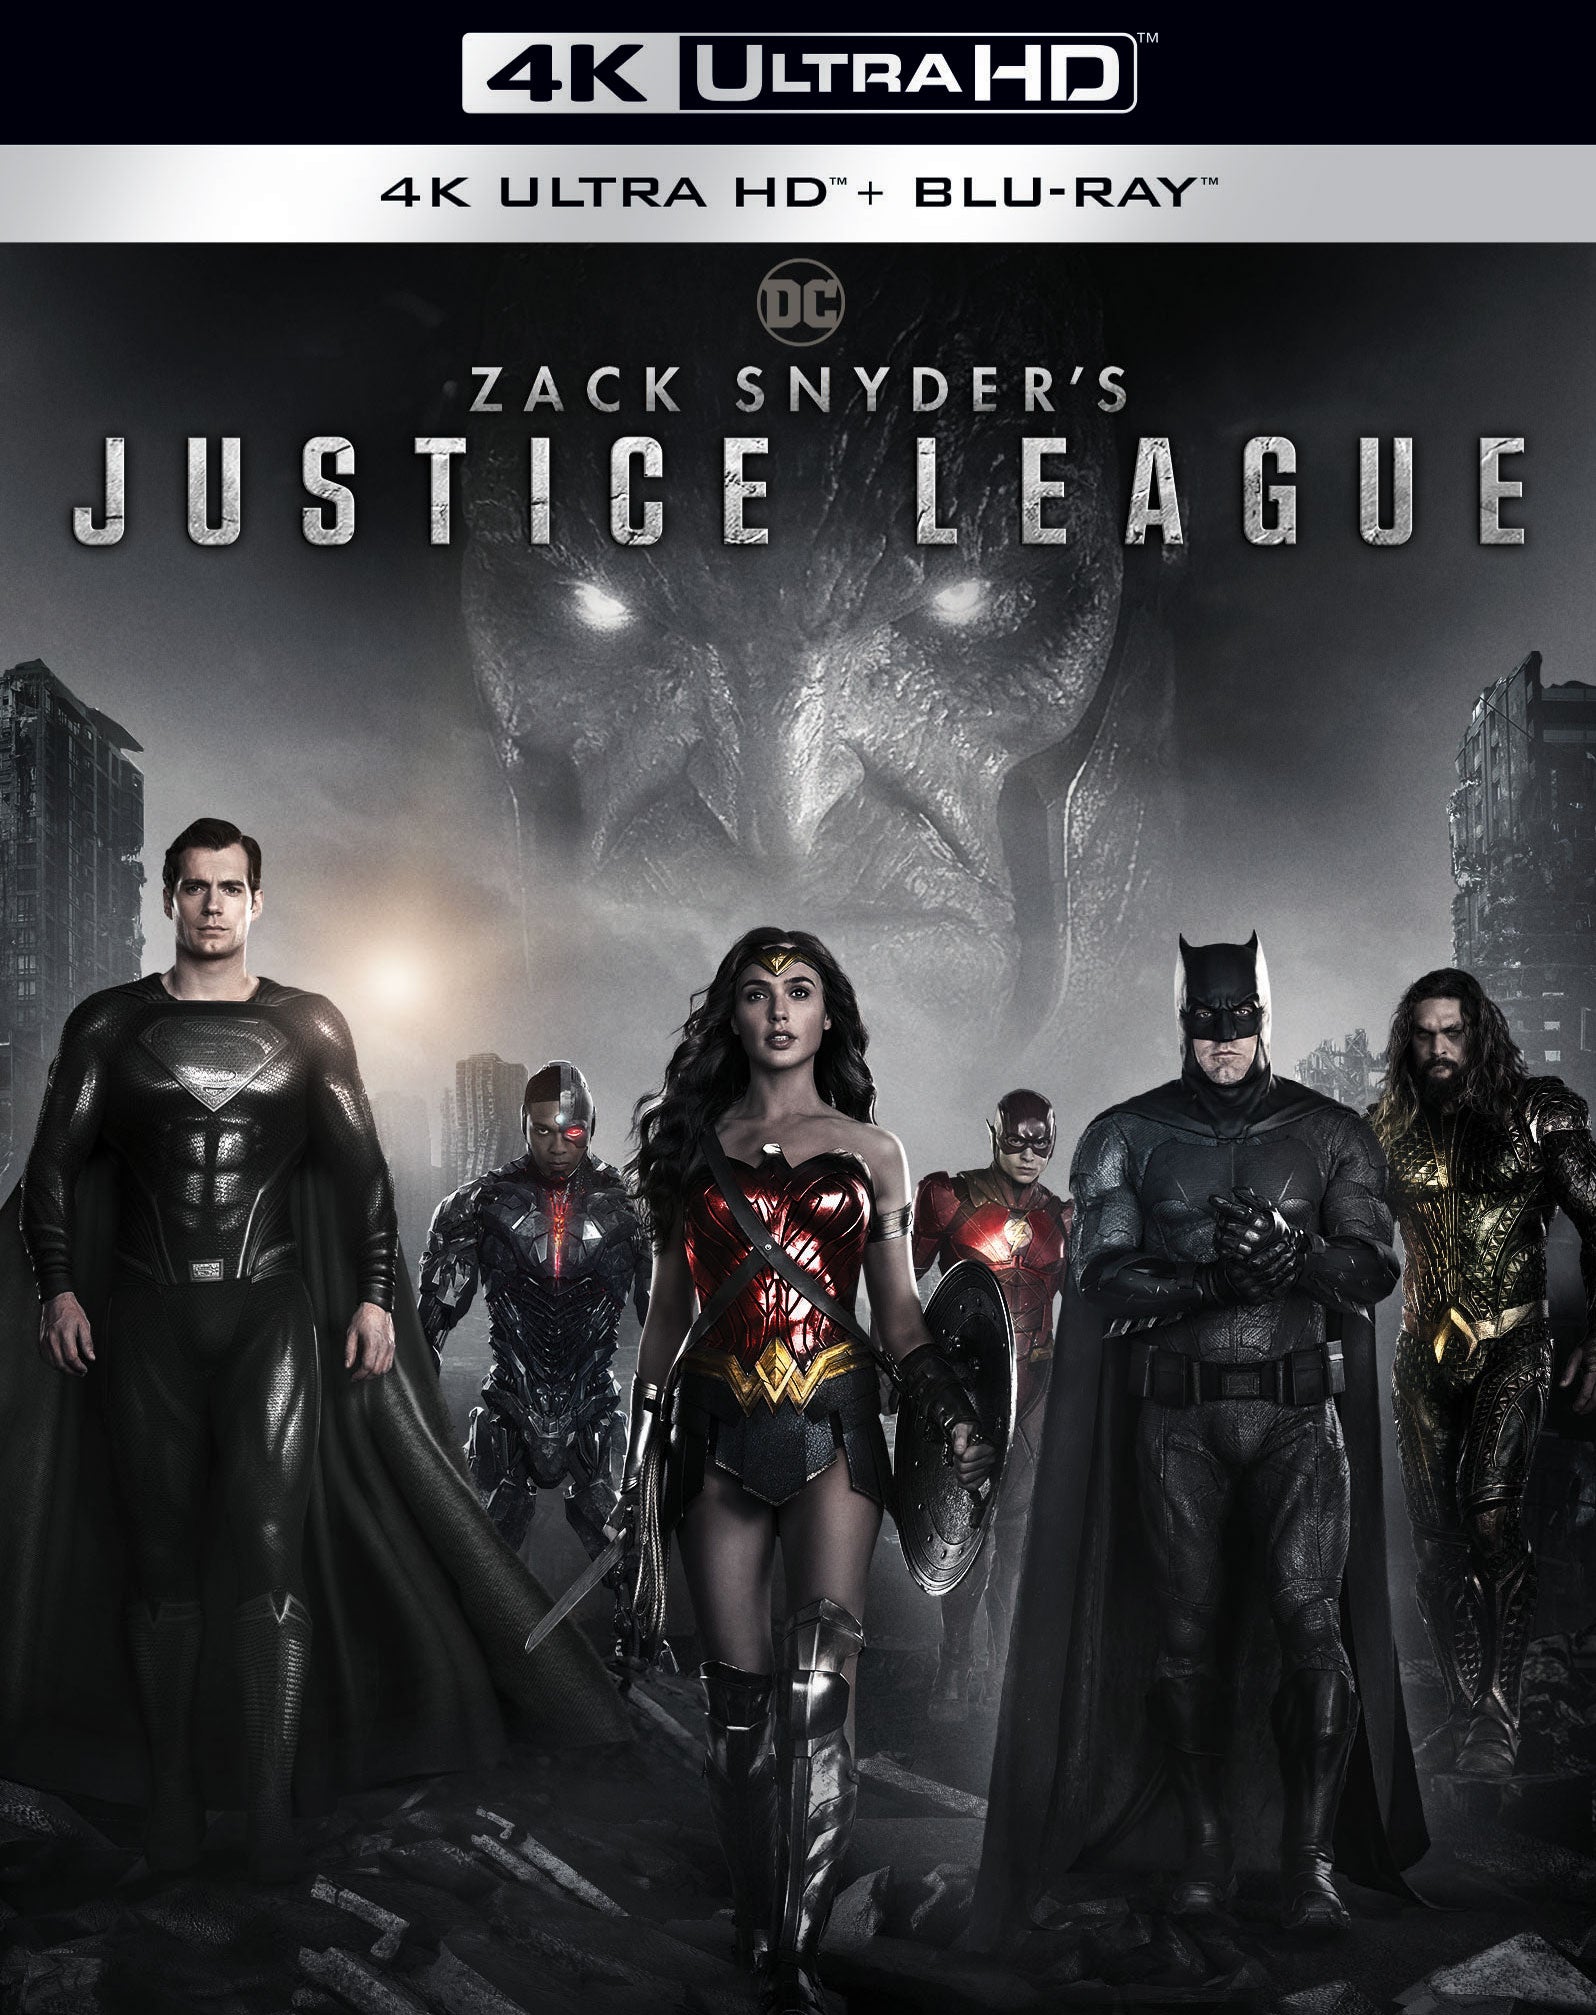 Zack Snyder's Justice League [4K Ultra HD Blu-ray/Blu-ray] cover art